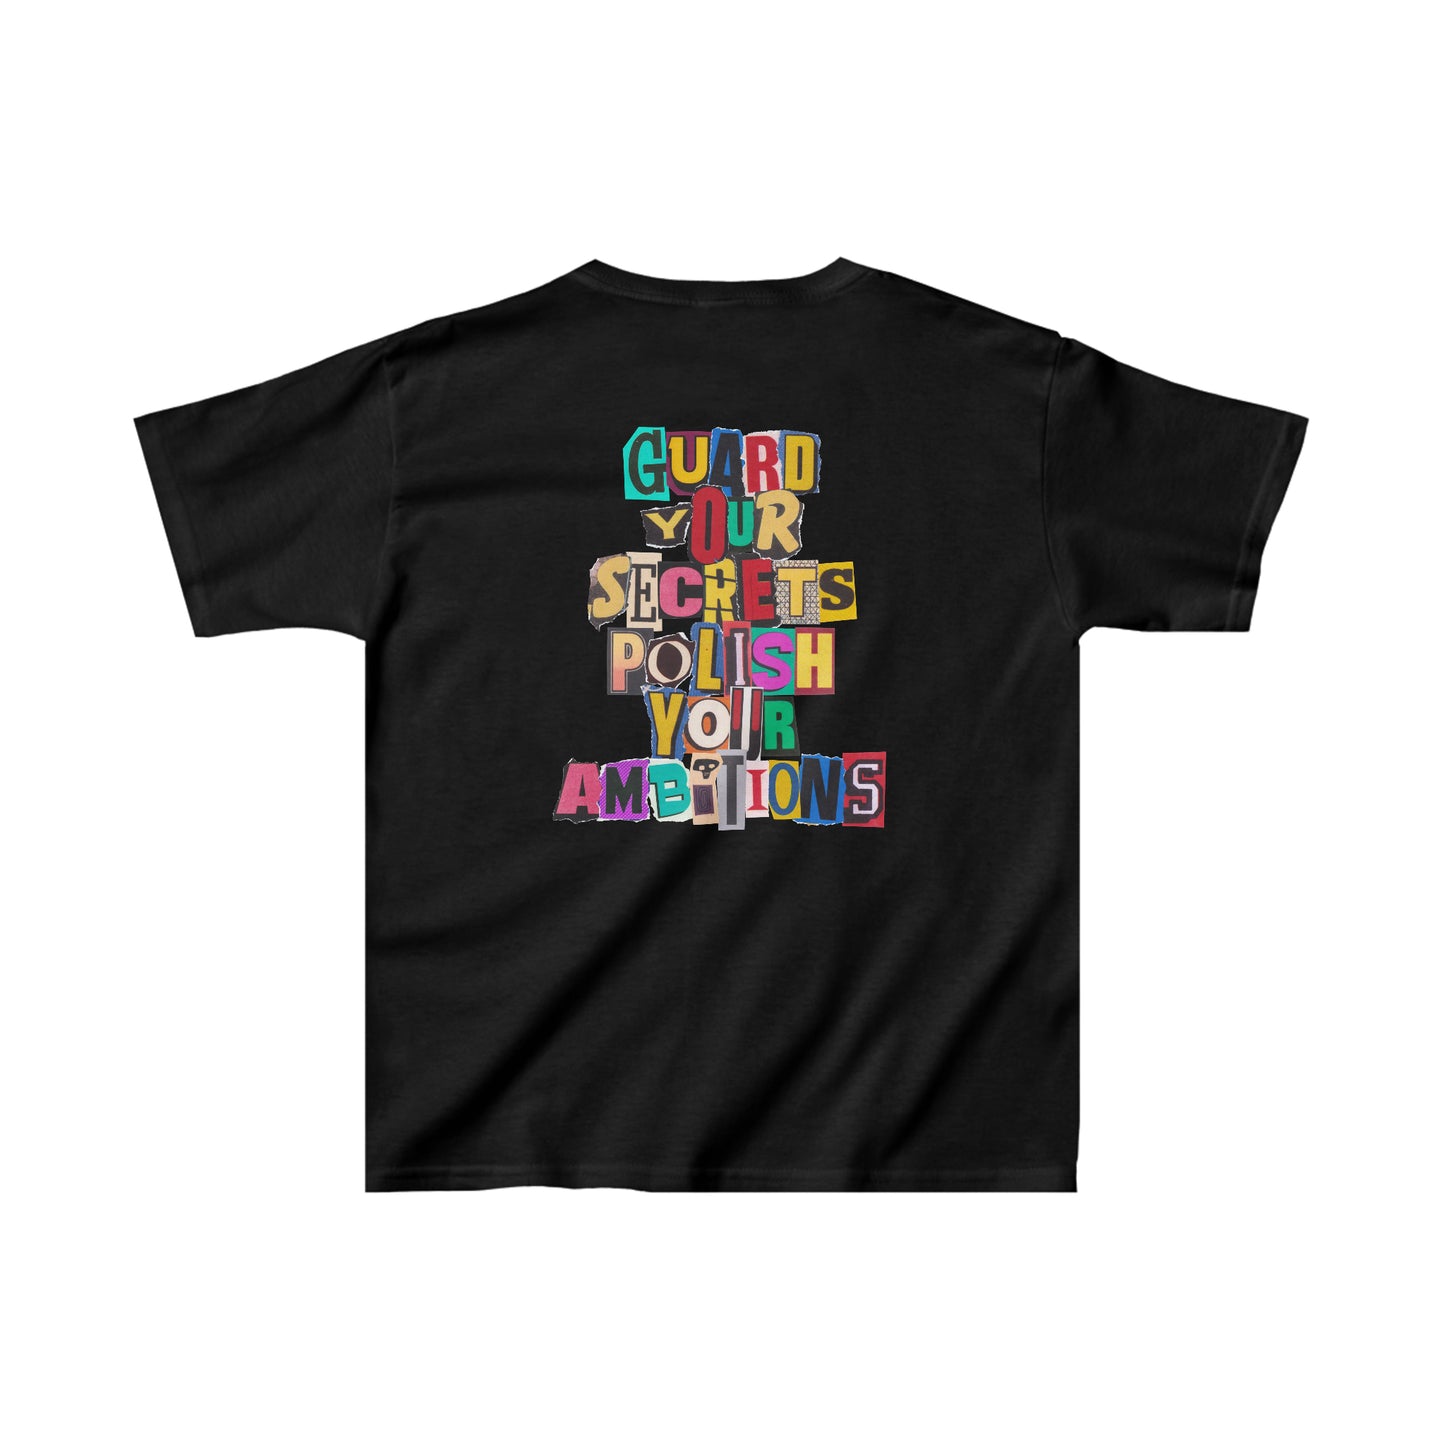 Youth WIY x McLaurin Vintage T-Shirt